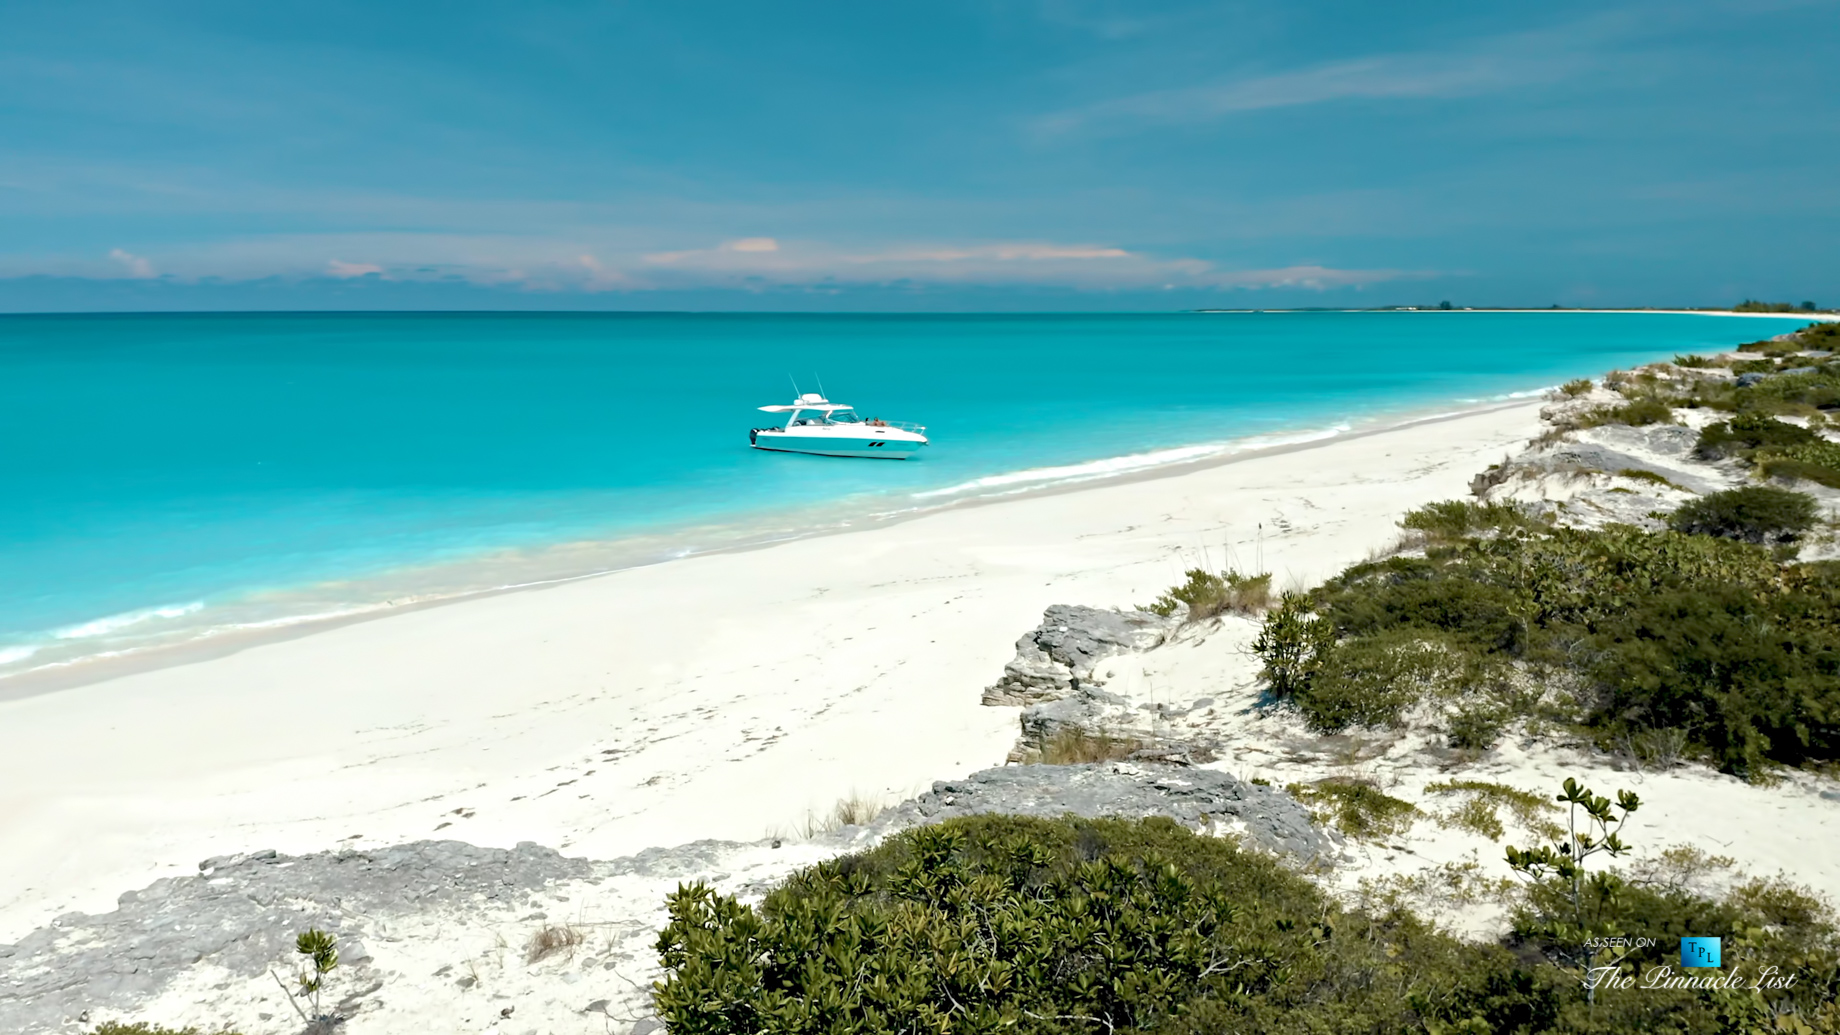 Tip of the Tail Villa - Providenciales, Turks and Caicos Islands - Drone Aerial Caribbean White Sand Beach - Luxury Real Estate - South Shore Peninsula Home